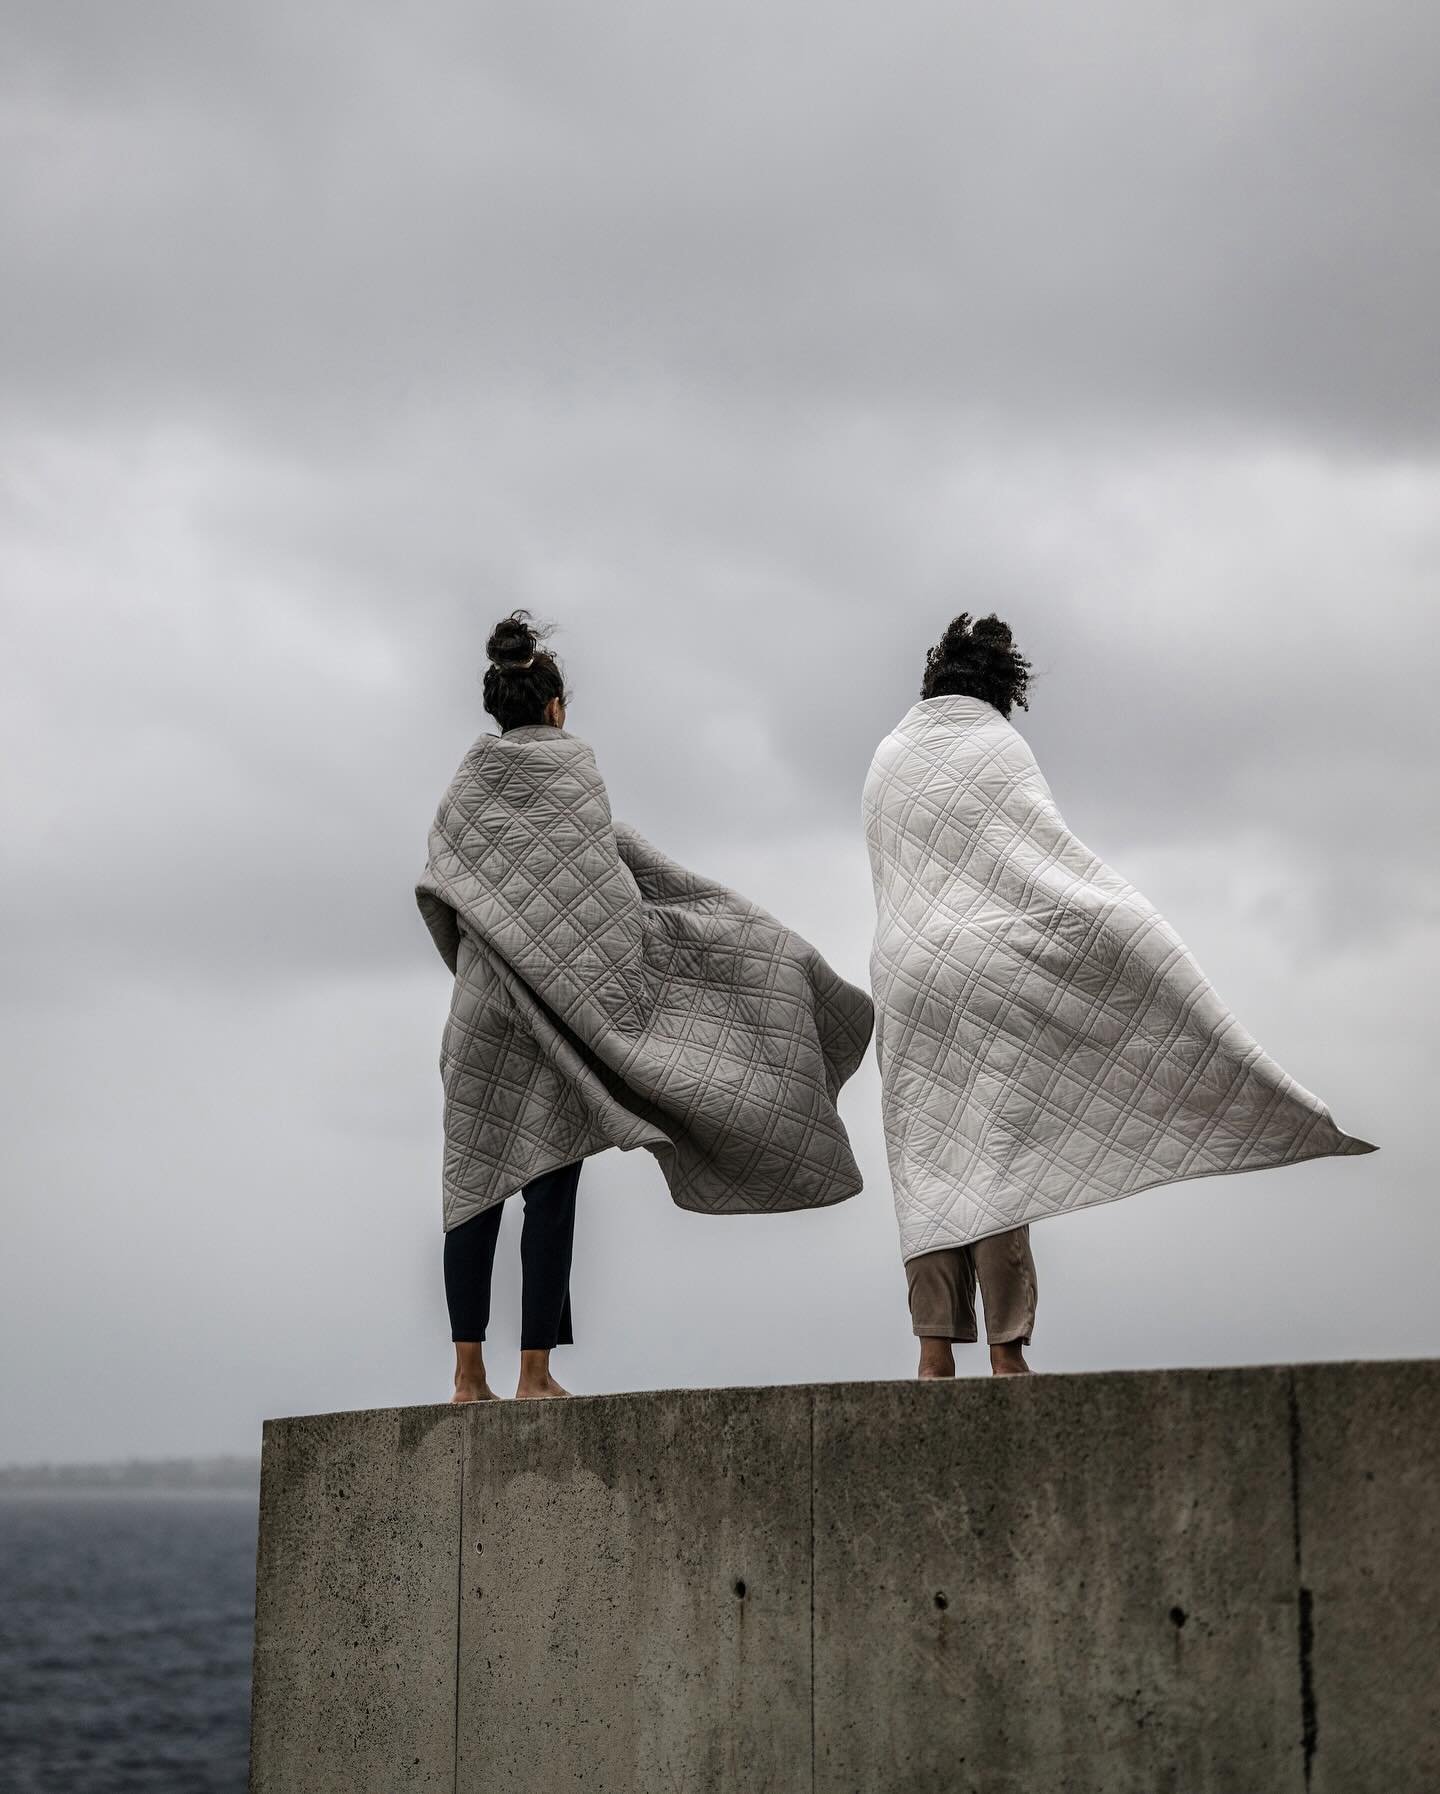 Joining forces for the second time, Two Good Co. (@twogoodco ) and Jac+Jack ( @jacandjack ) have launched a limited edition quilted blanket collection&mdash;the collaboration set to gift hundreds of warm hugs to women&rsquo;s shelters.

See more via 